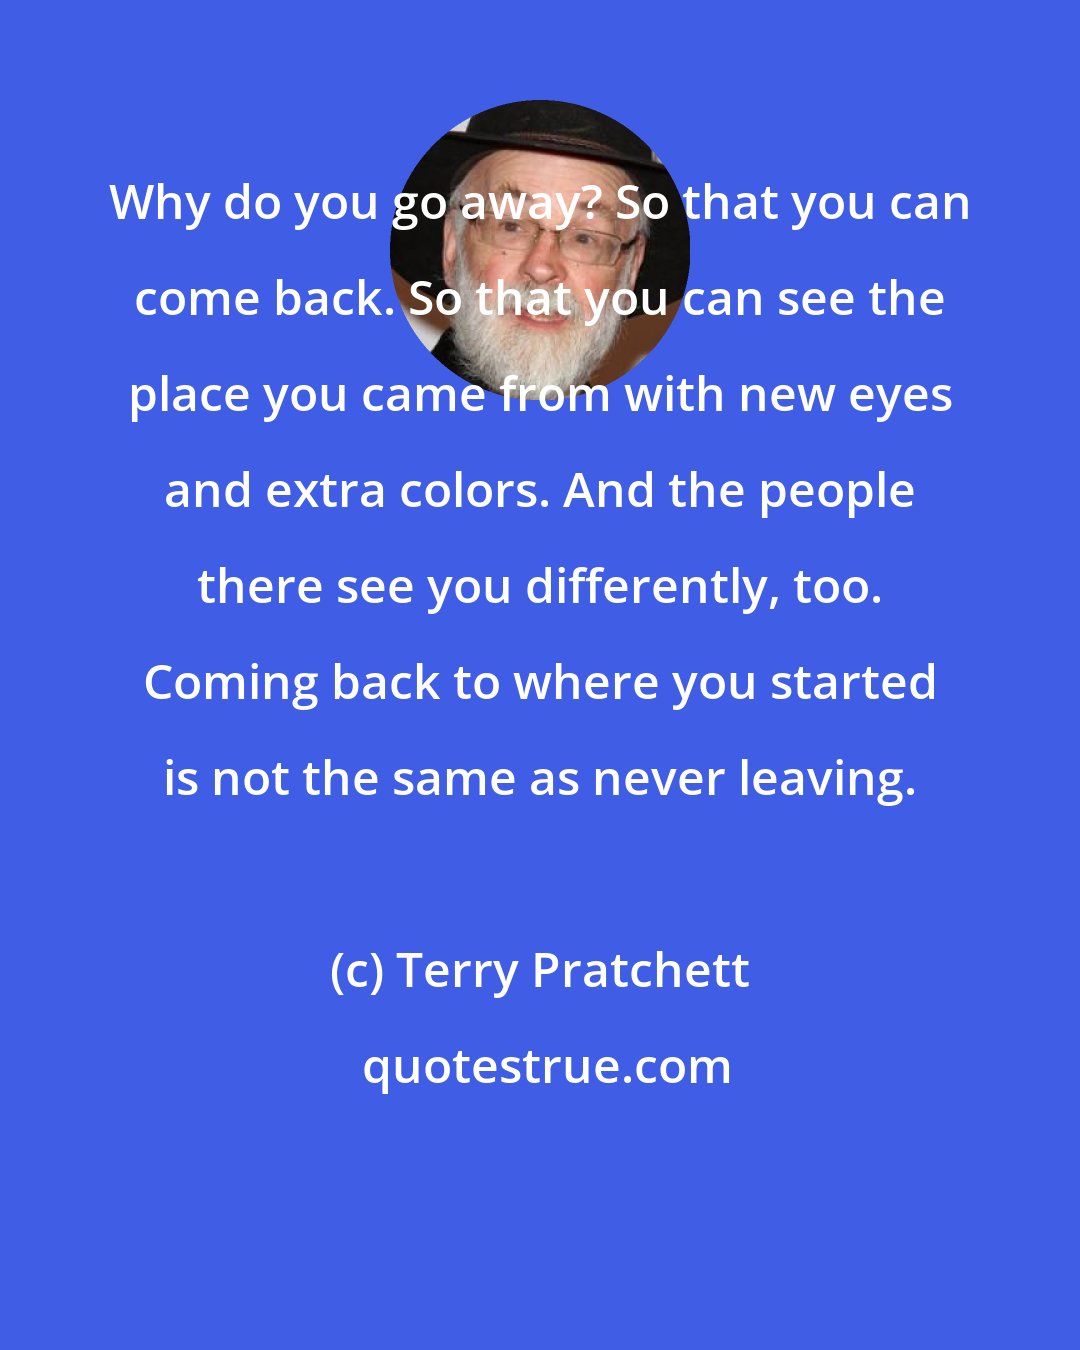 Terry Pratchett: Why do you go away? So that you can come back. So that you can see the place you came from with new eyes and extra colors. And the people there see you differently, too. Coming back to where you started is not the same as never leaving.